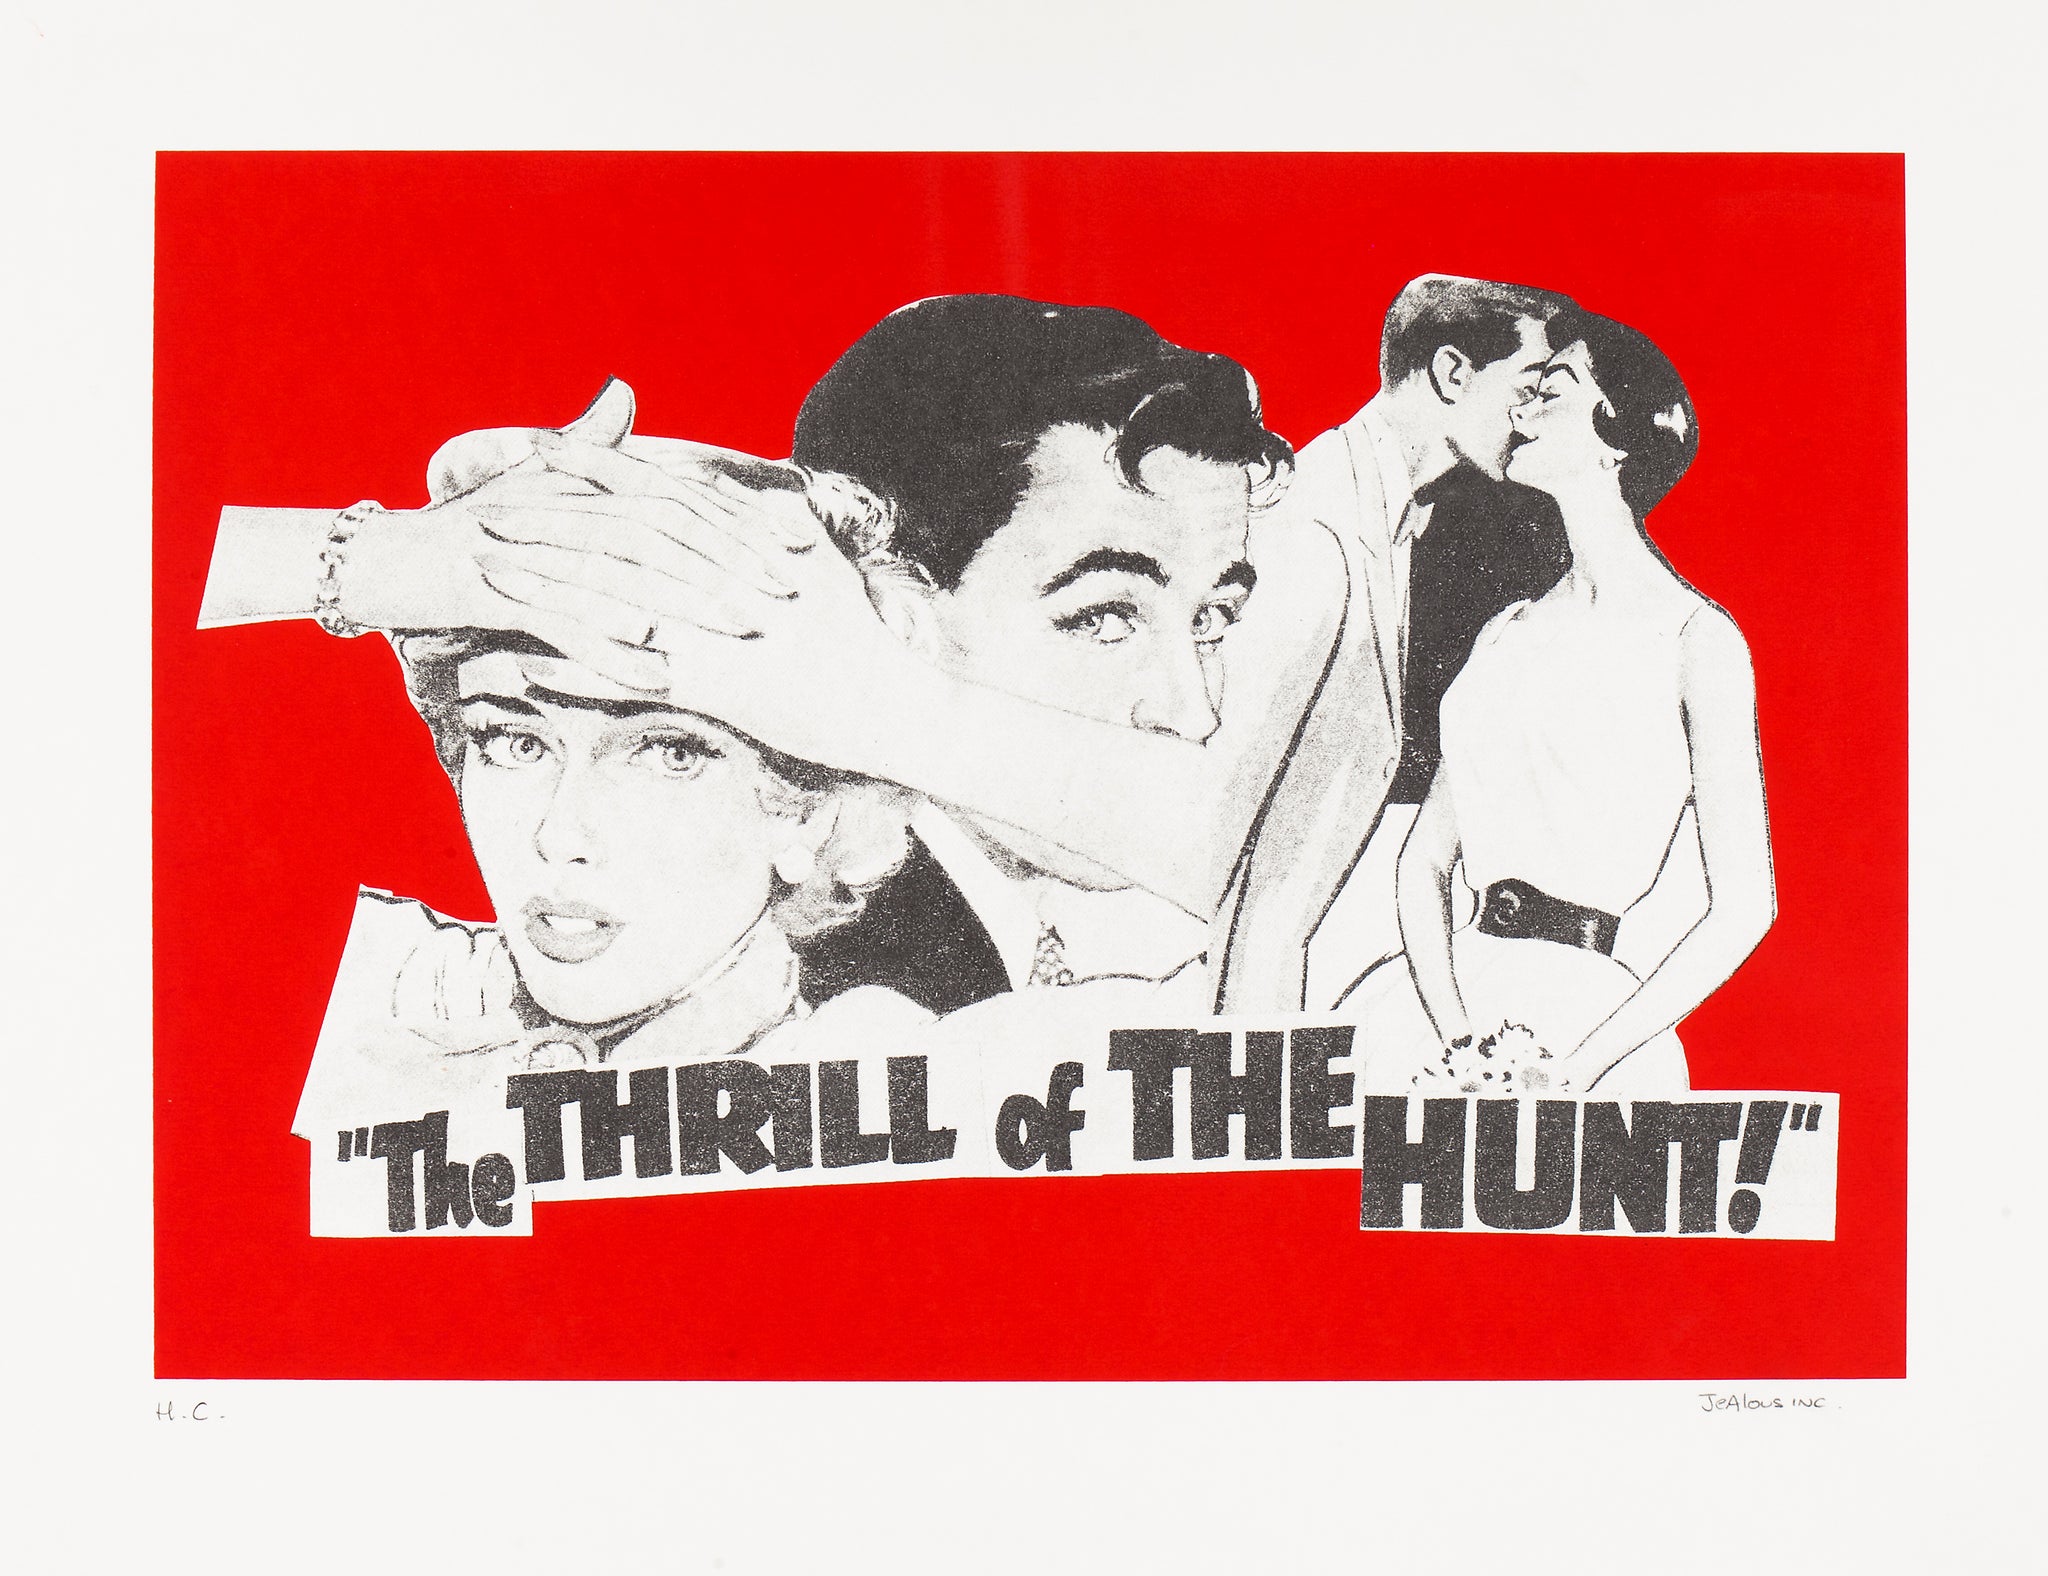 The Thrill of The Hunt